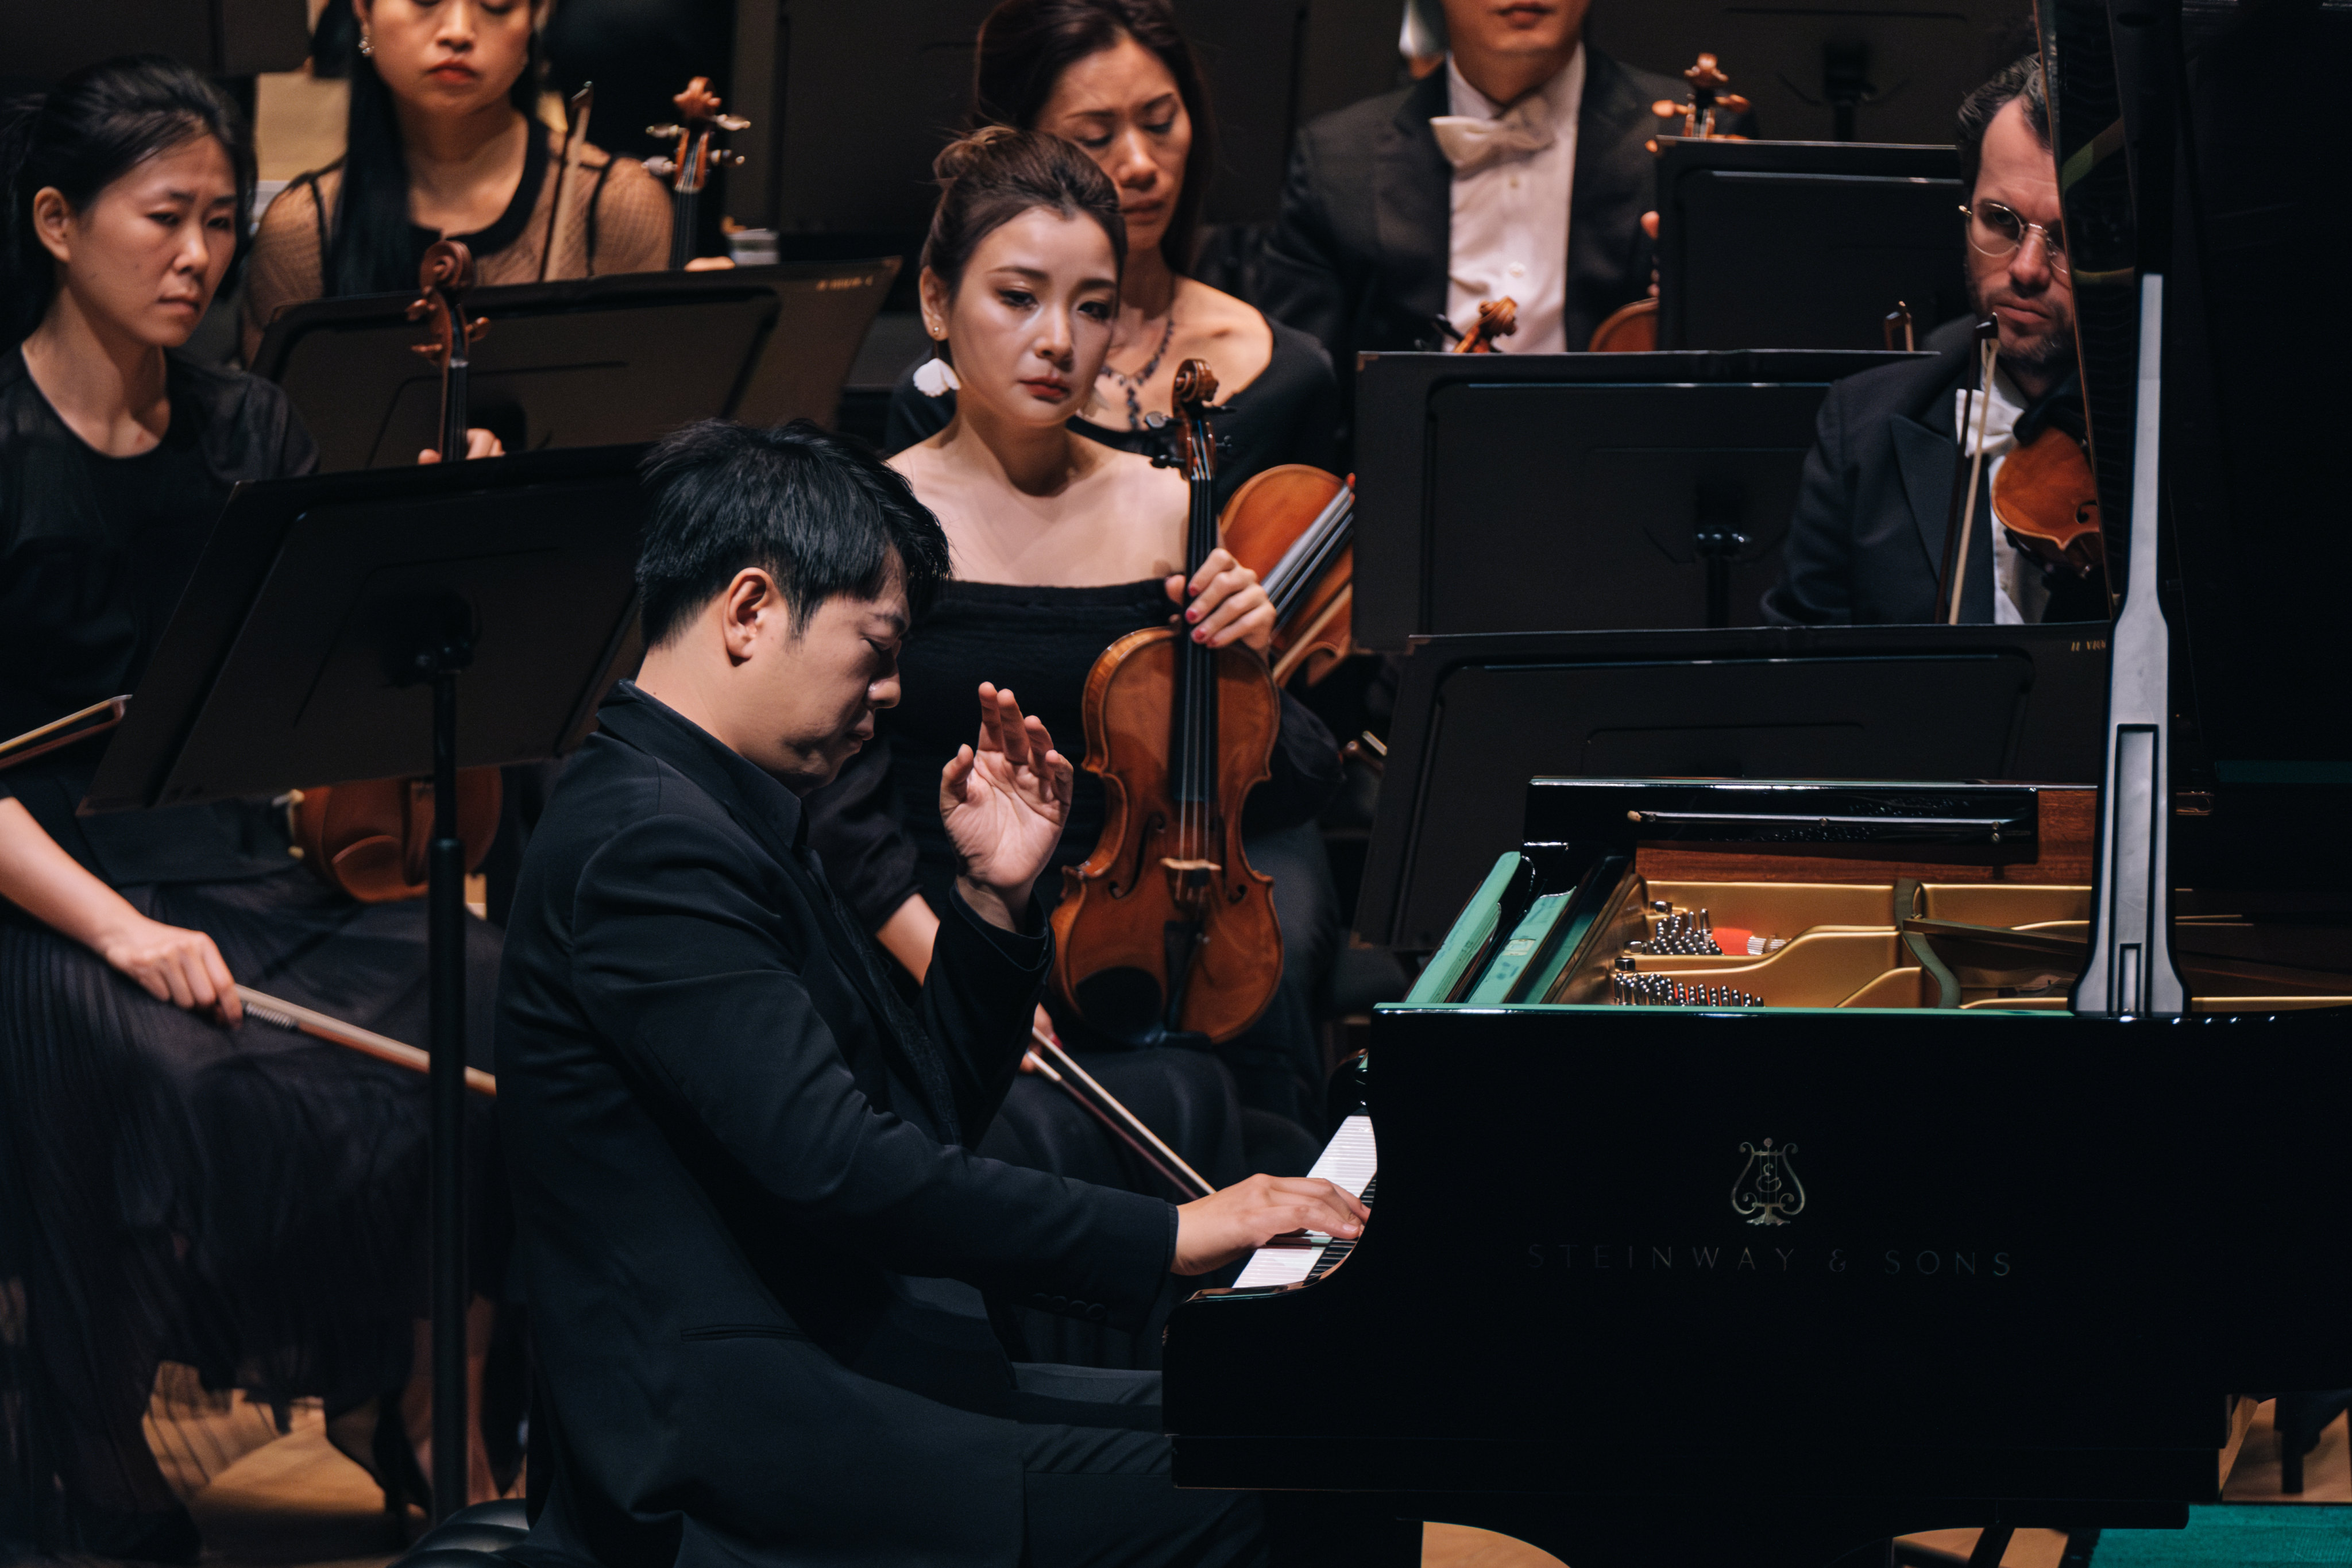 Chinese pianist Lang Lang performs Beethoven’s Concerto No 3 with the Hong Kong Philharmonic under the baton of Jaap van Zweden at the Hong Kong Cultural Centre Concert Hall on December 15. He followed it with encores by Bach and Kermit the Frog. Photo: Ka Lam/HK Phil